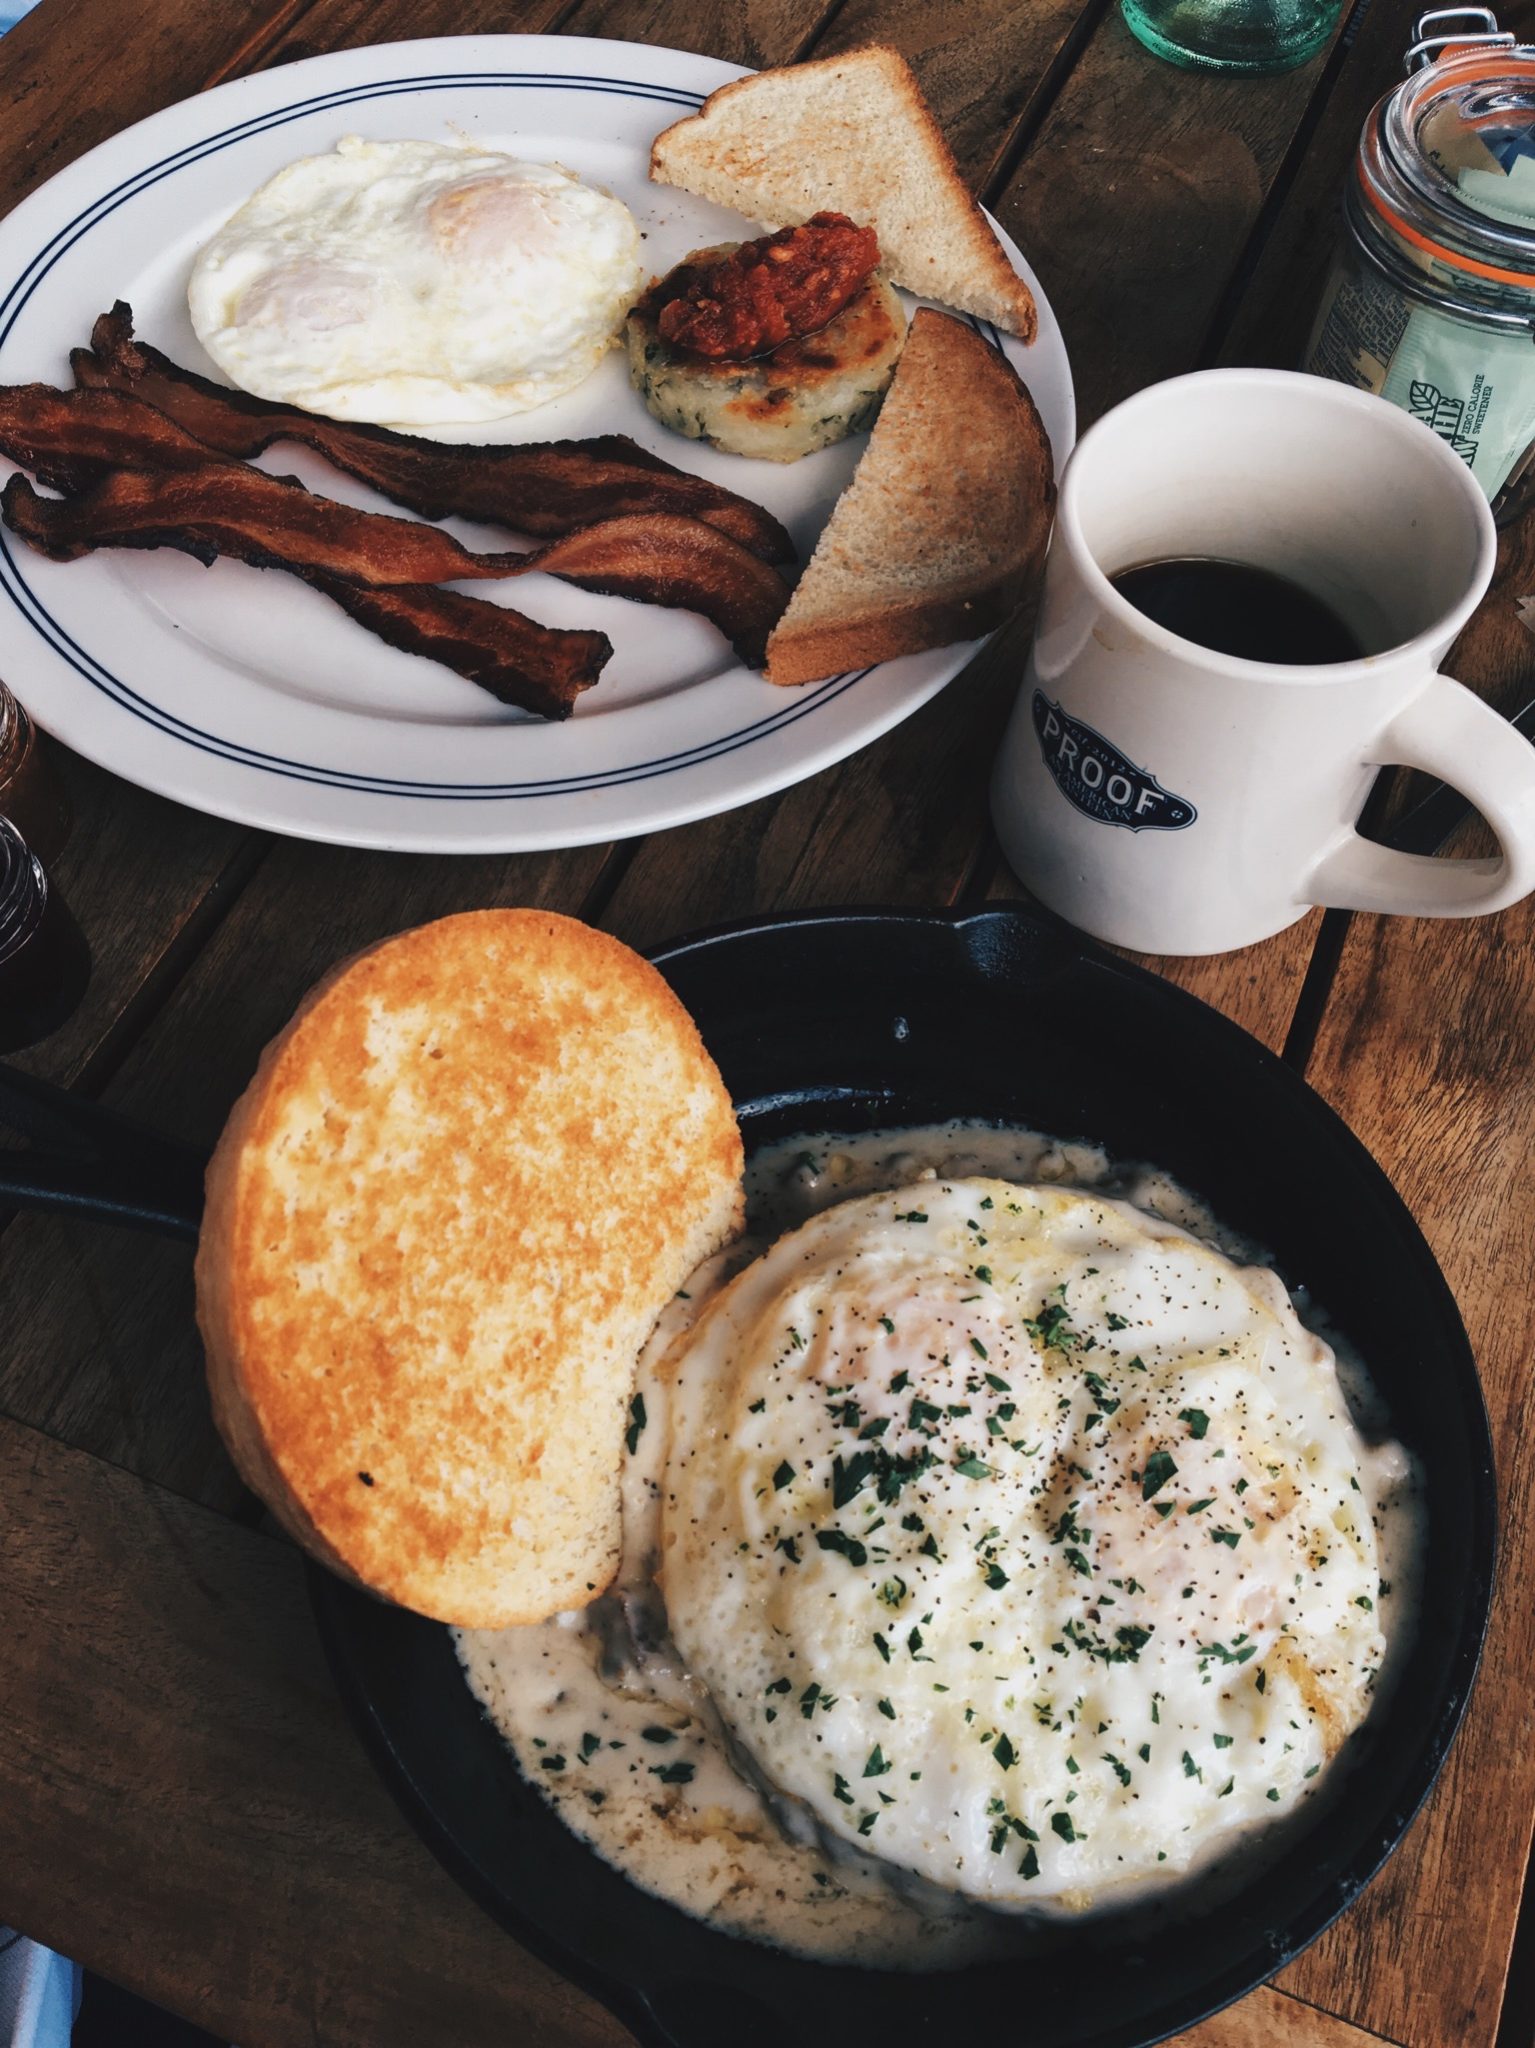 The bigger than Texas biscuits and gravy | Scottsdale Minimoon | Scottsdale, AZ travel | where to stay in Scottsdale, AZ | Scottsdale, AZ travel guide | hotels in Scottsdale, AZ || Dressed to Kill